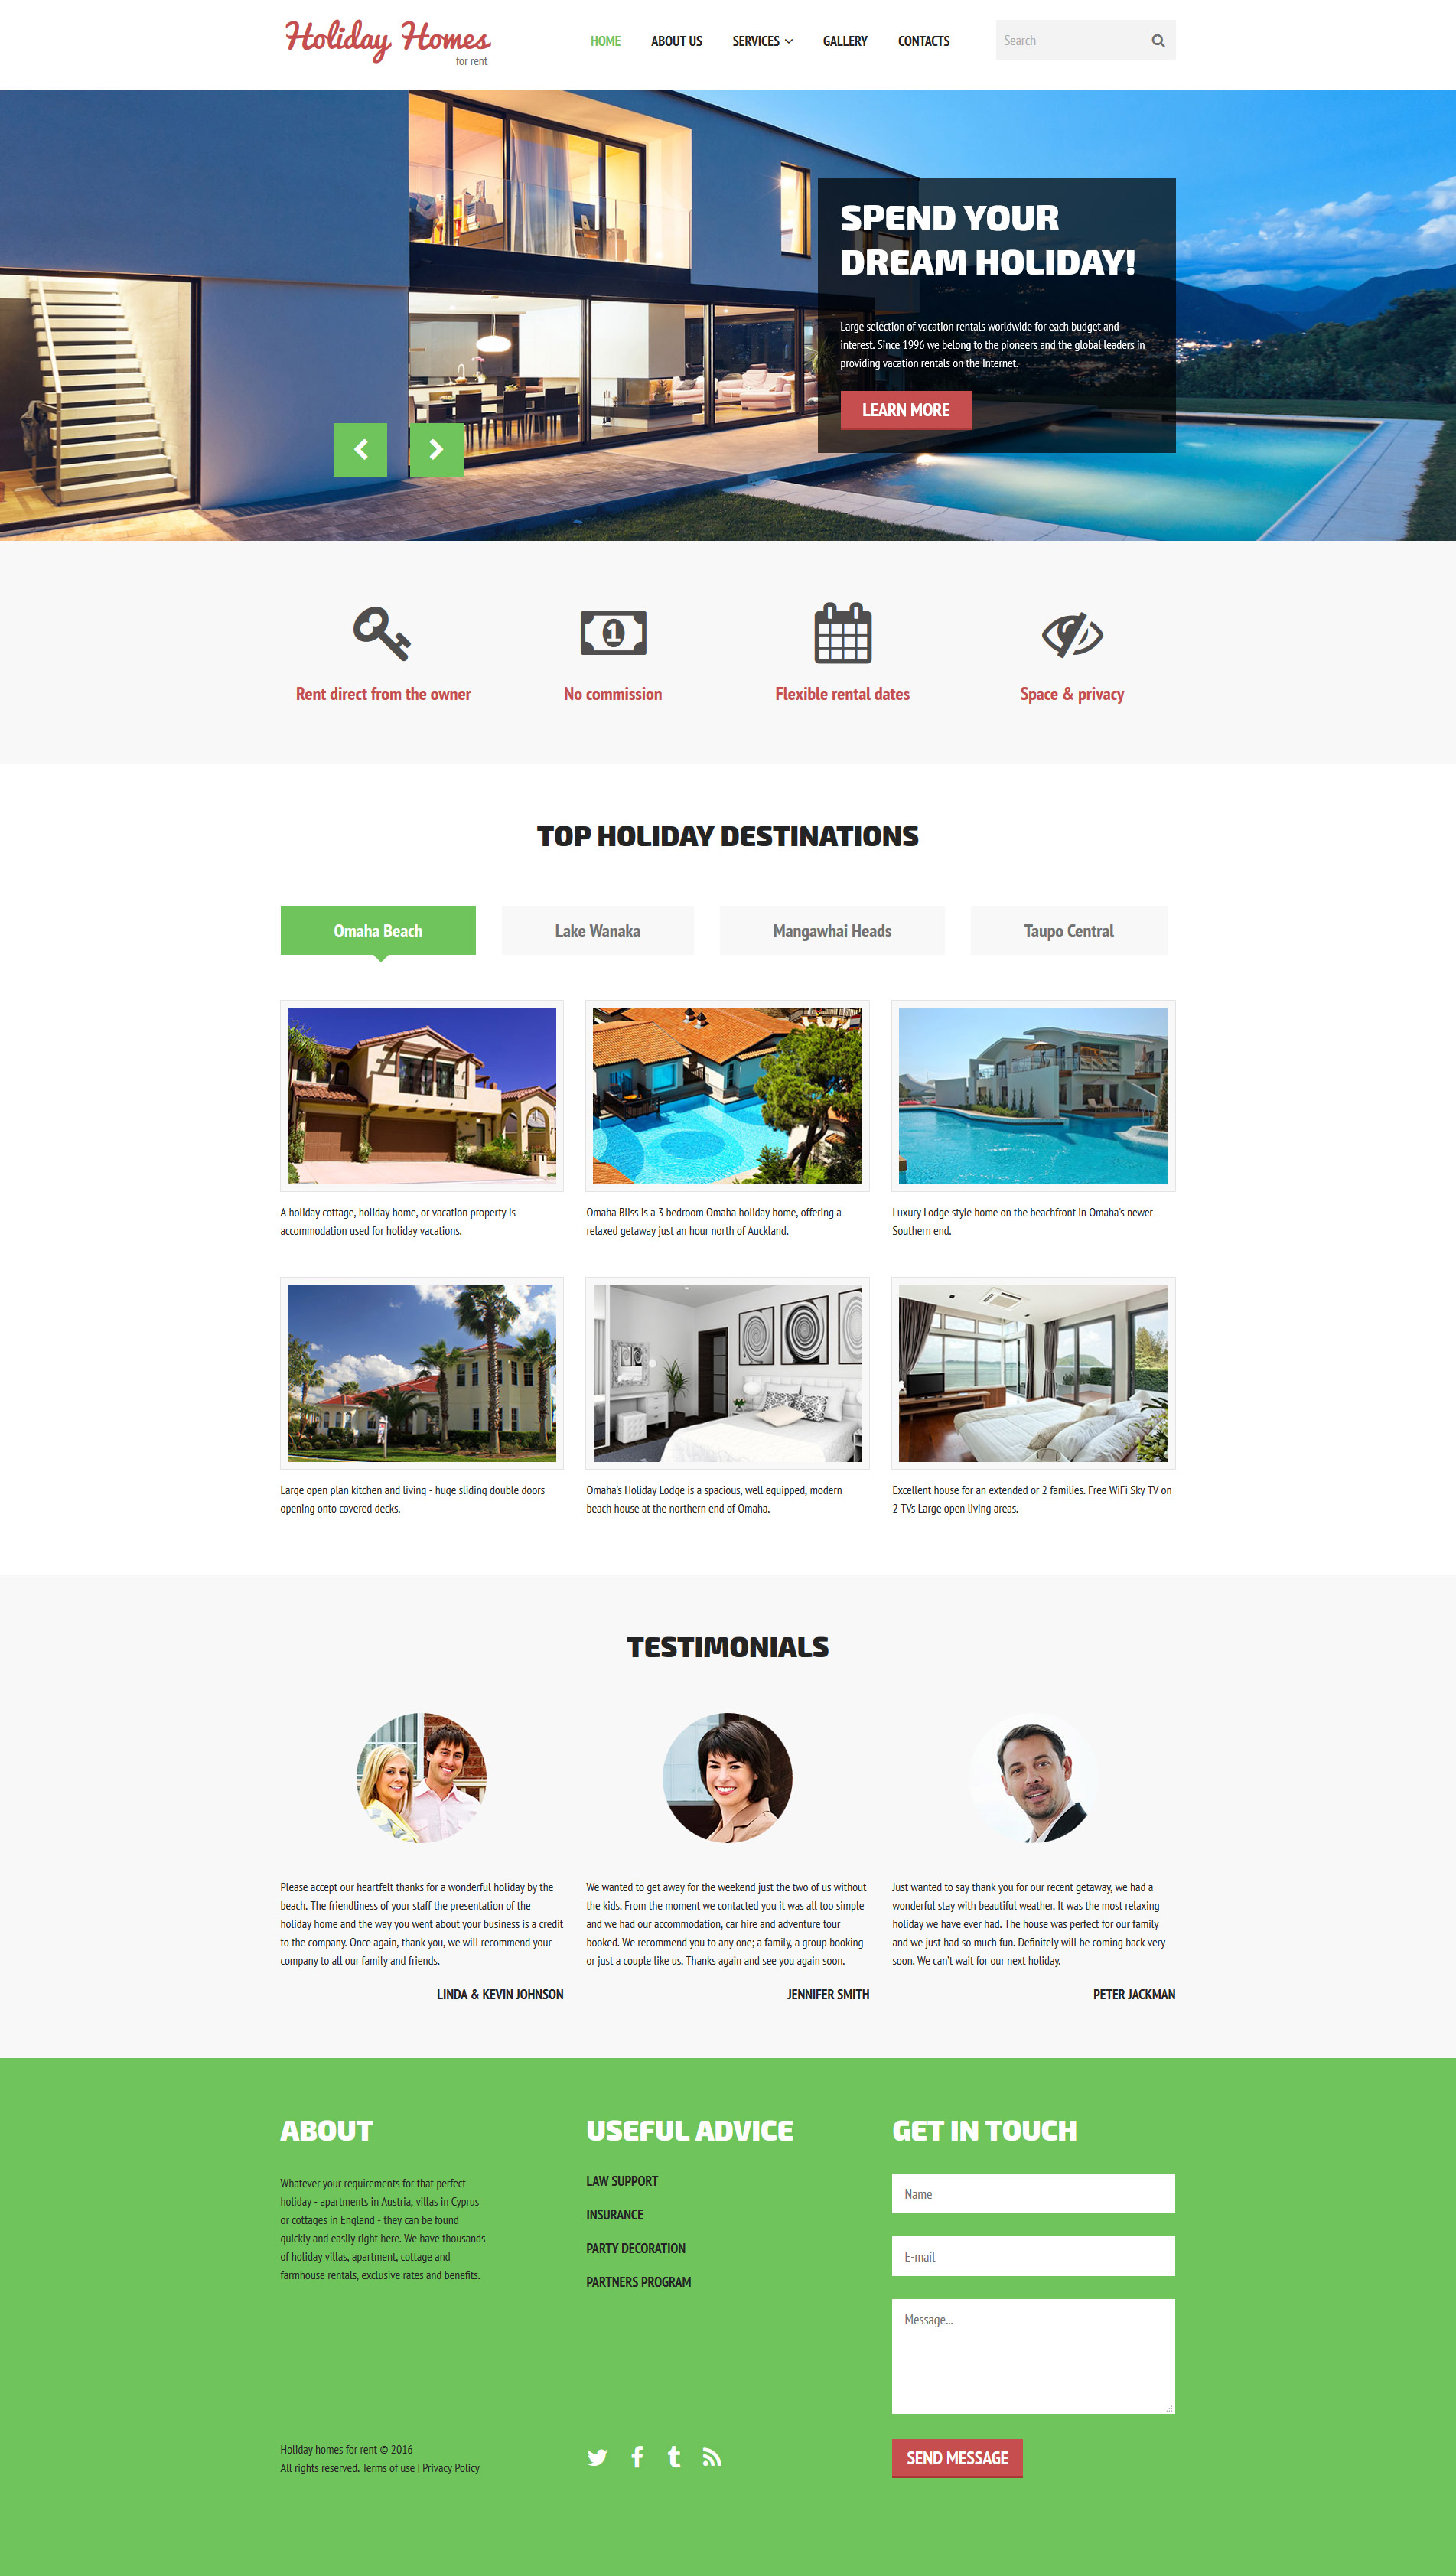 Apartment For Rent Flyer Template Free